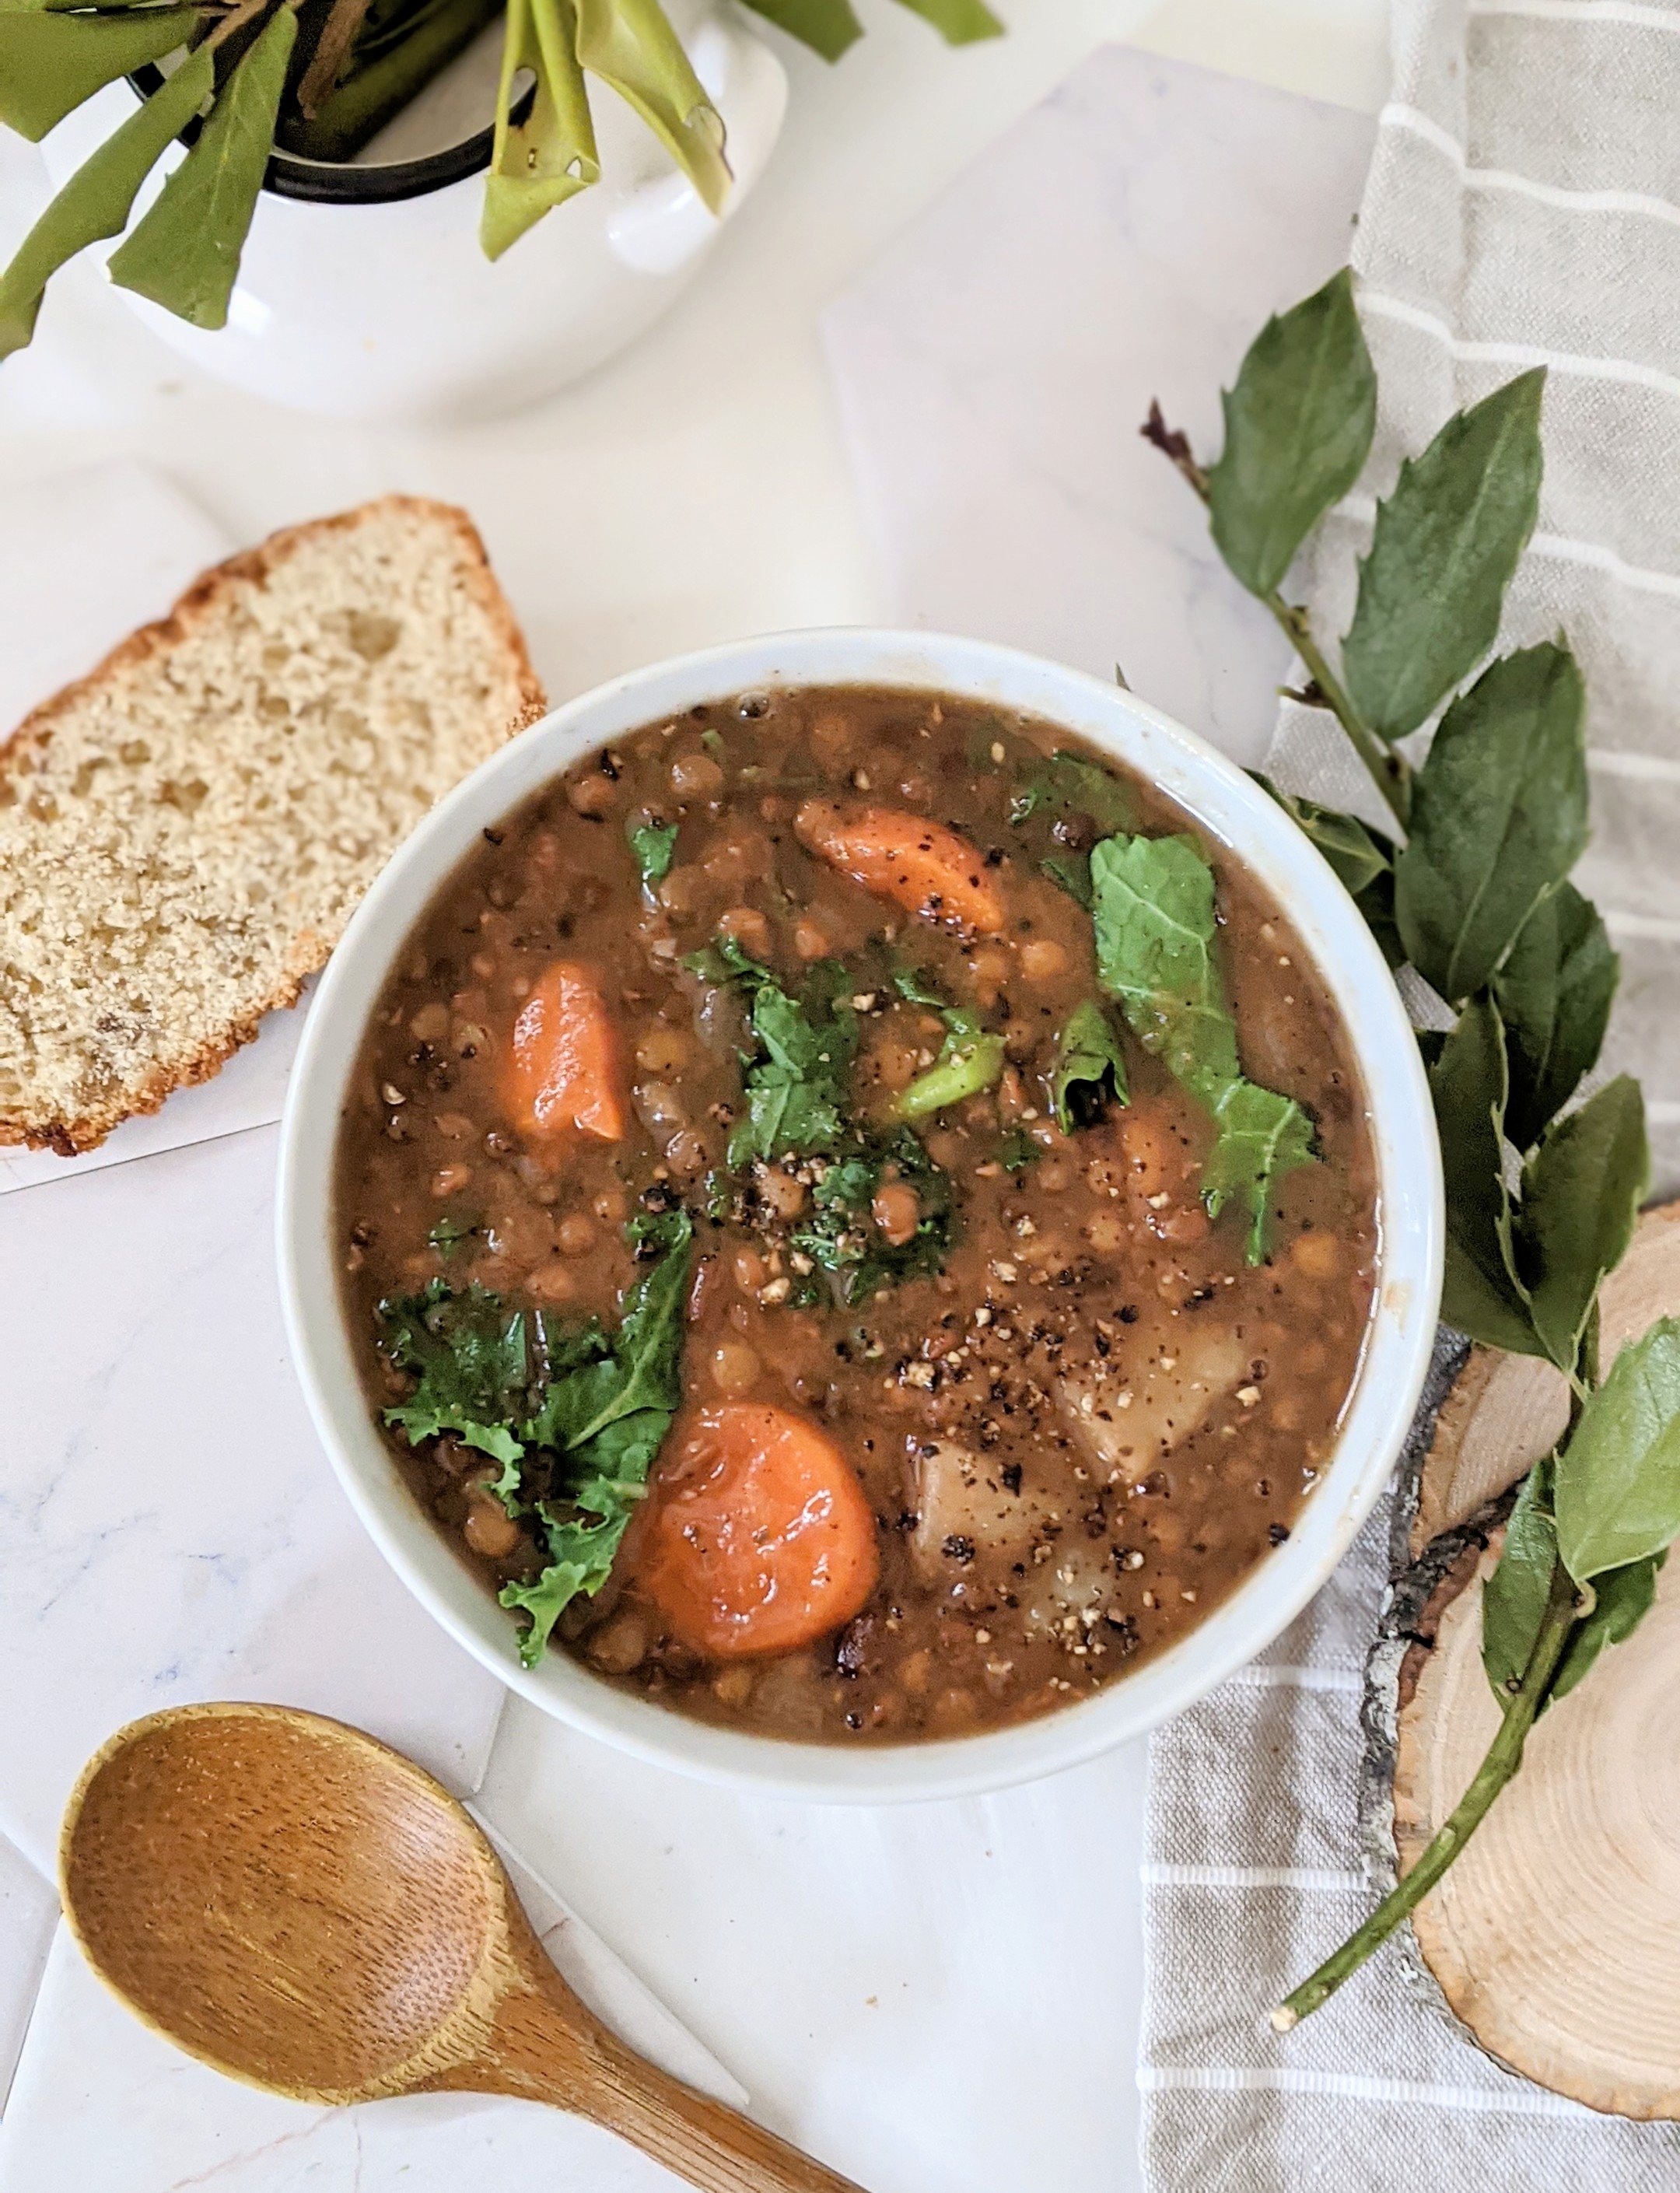 high carb low fat lentil soup recipes vegan oil free soups healthy instant pot fat free recipes meal prep no oil soup french hlentils green lentil soup healthy high protein lunches